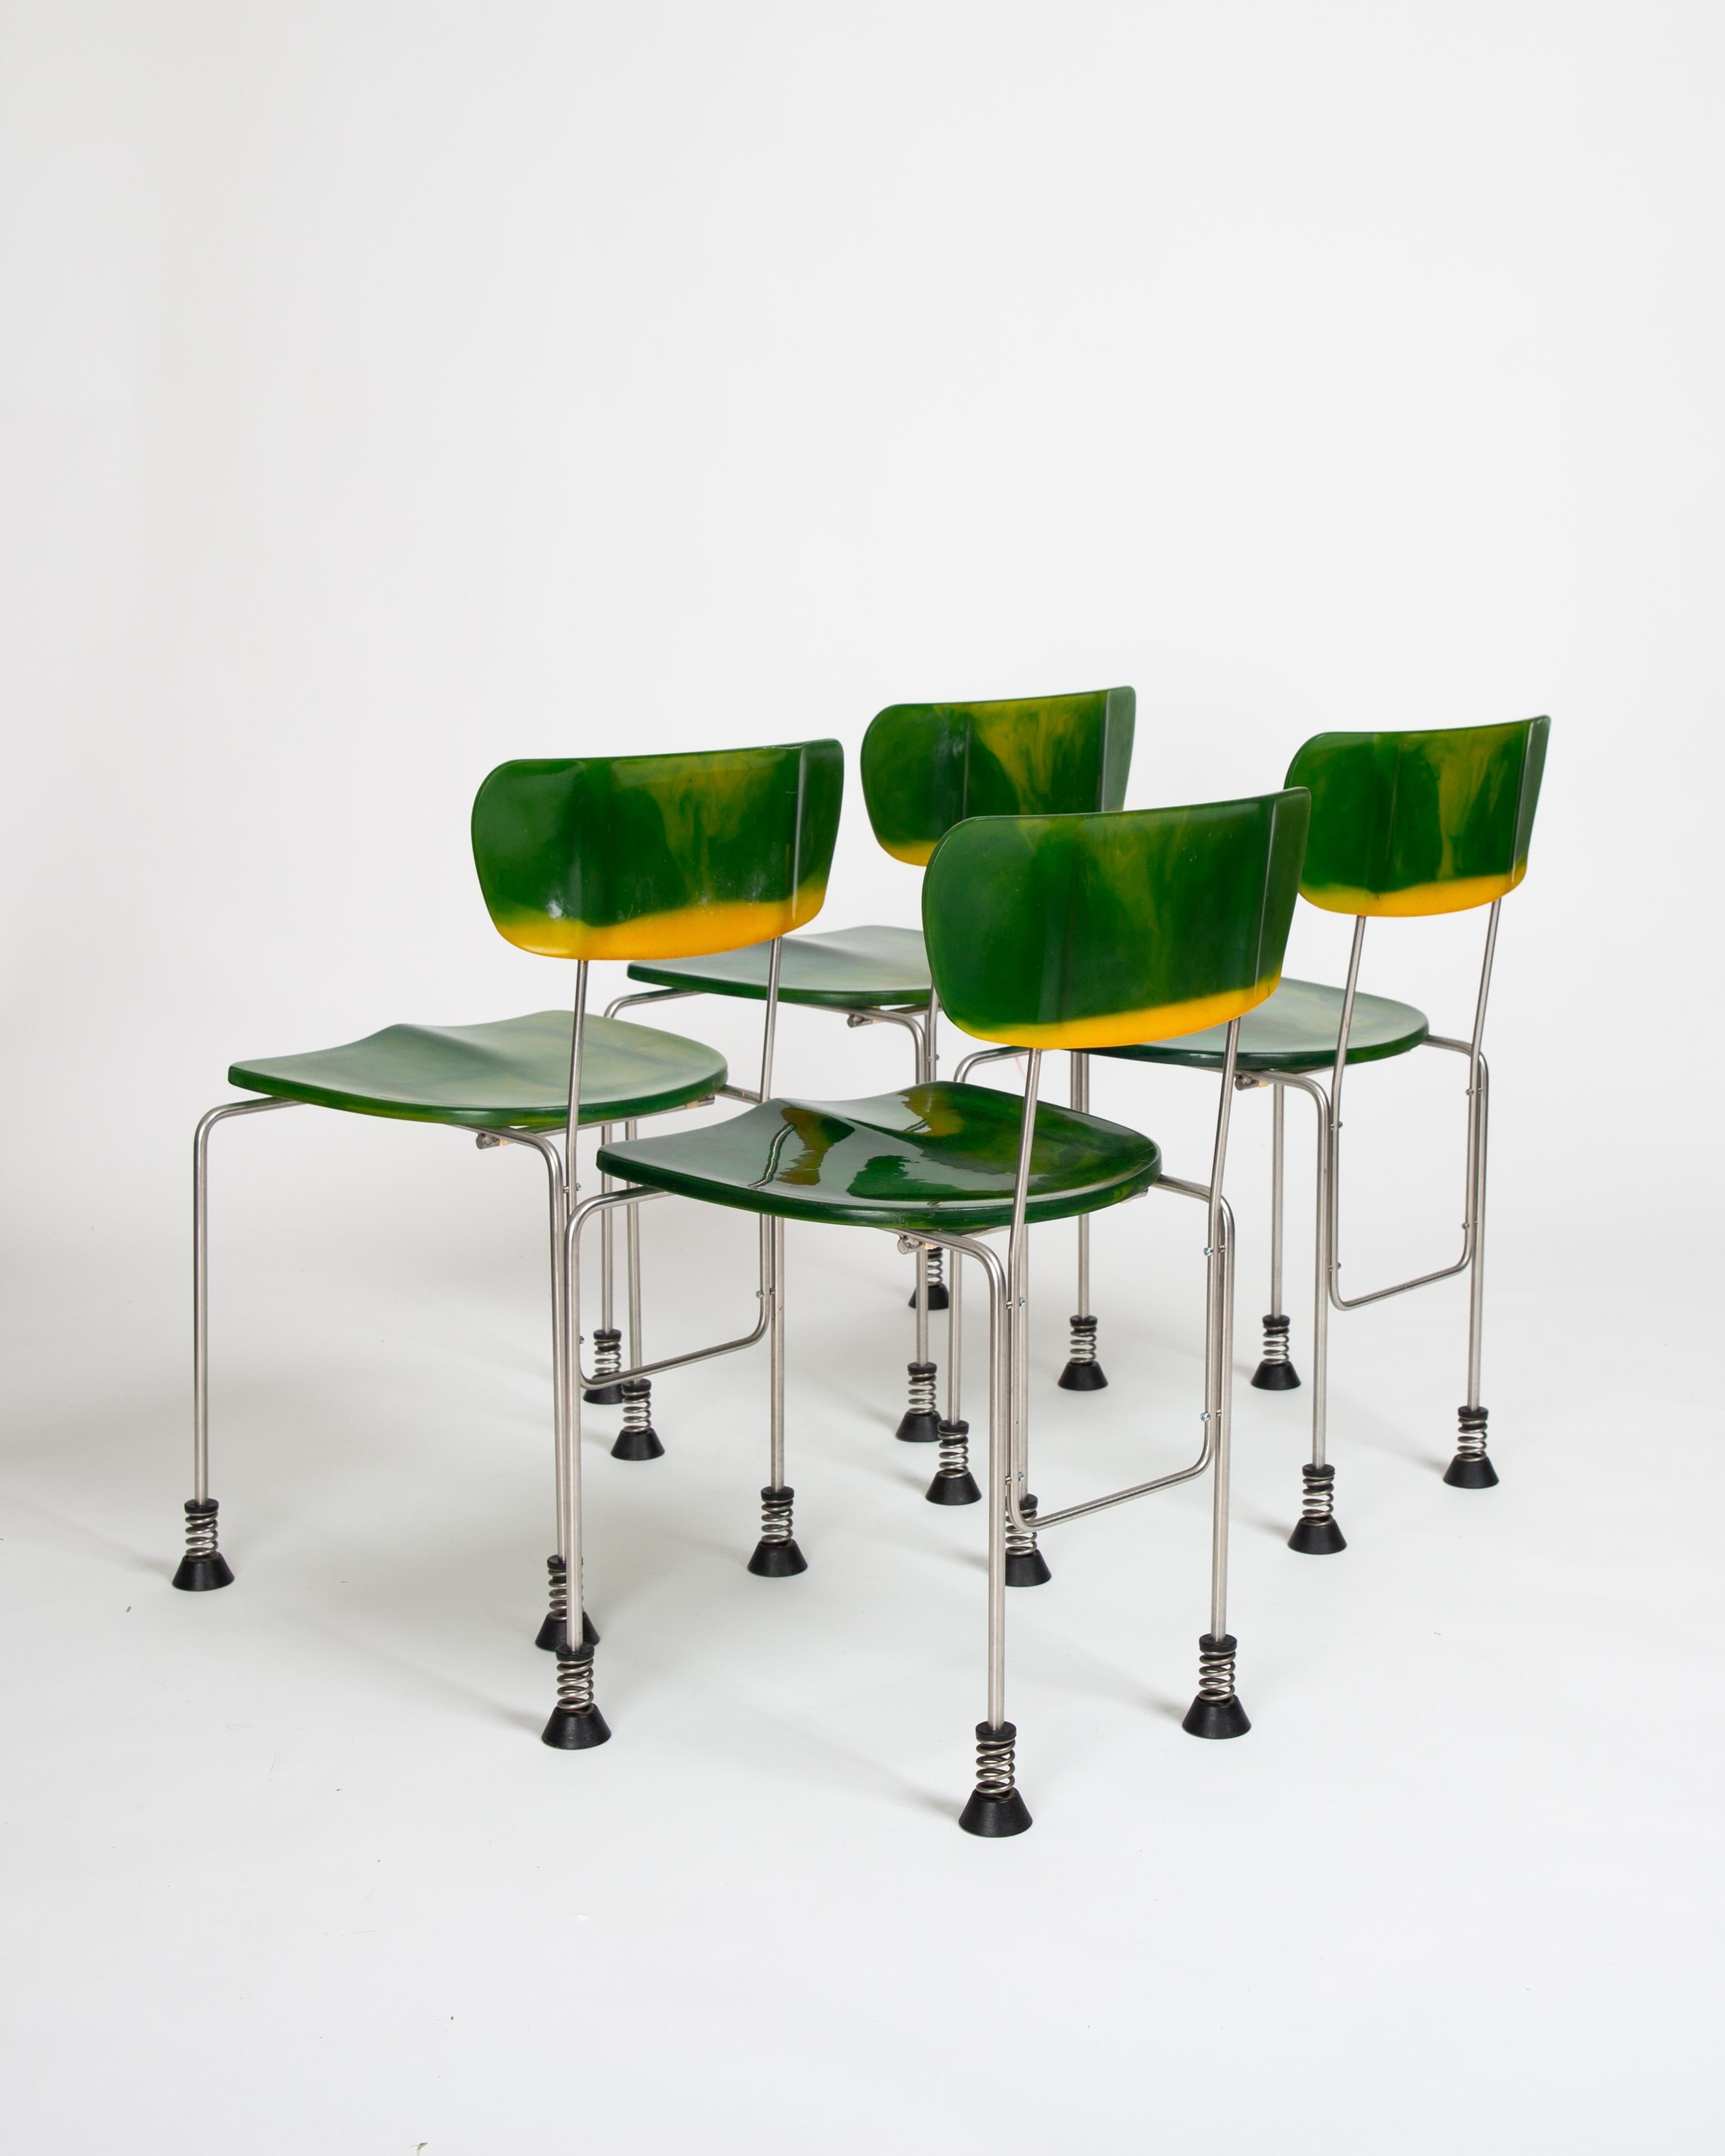 Italian Gaetano Pesce Broadway Chairs 543 Made in Italy by Bernini 1993 Green For Sale